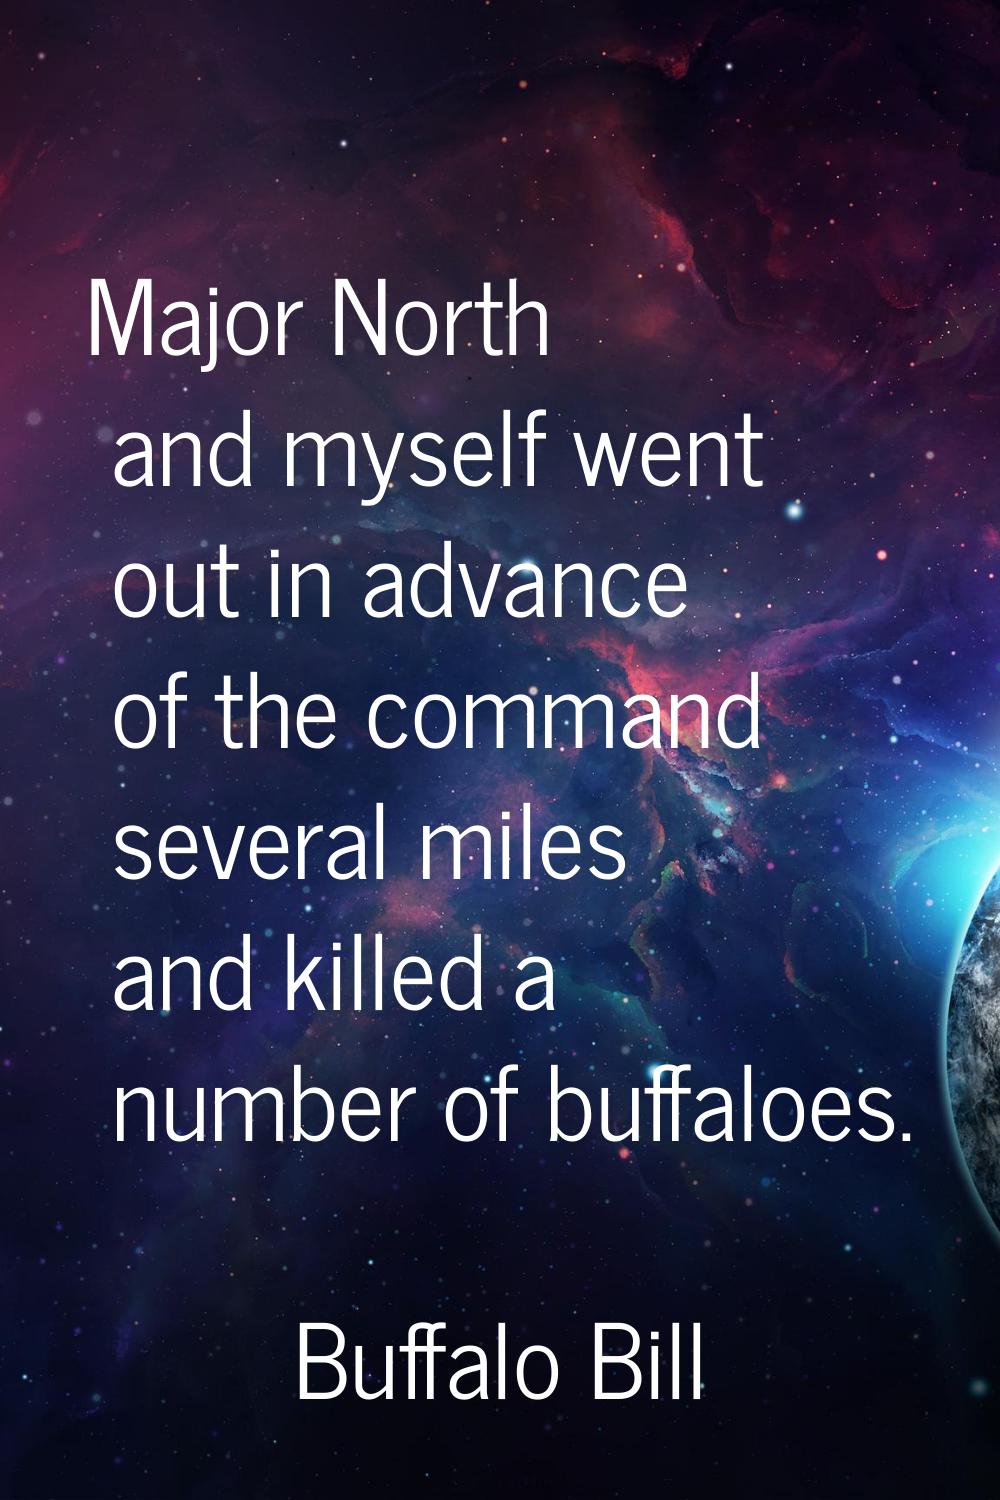 Major North and myself went out in advance of the command several miles and killed a number of buff